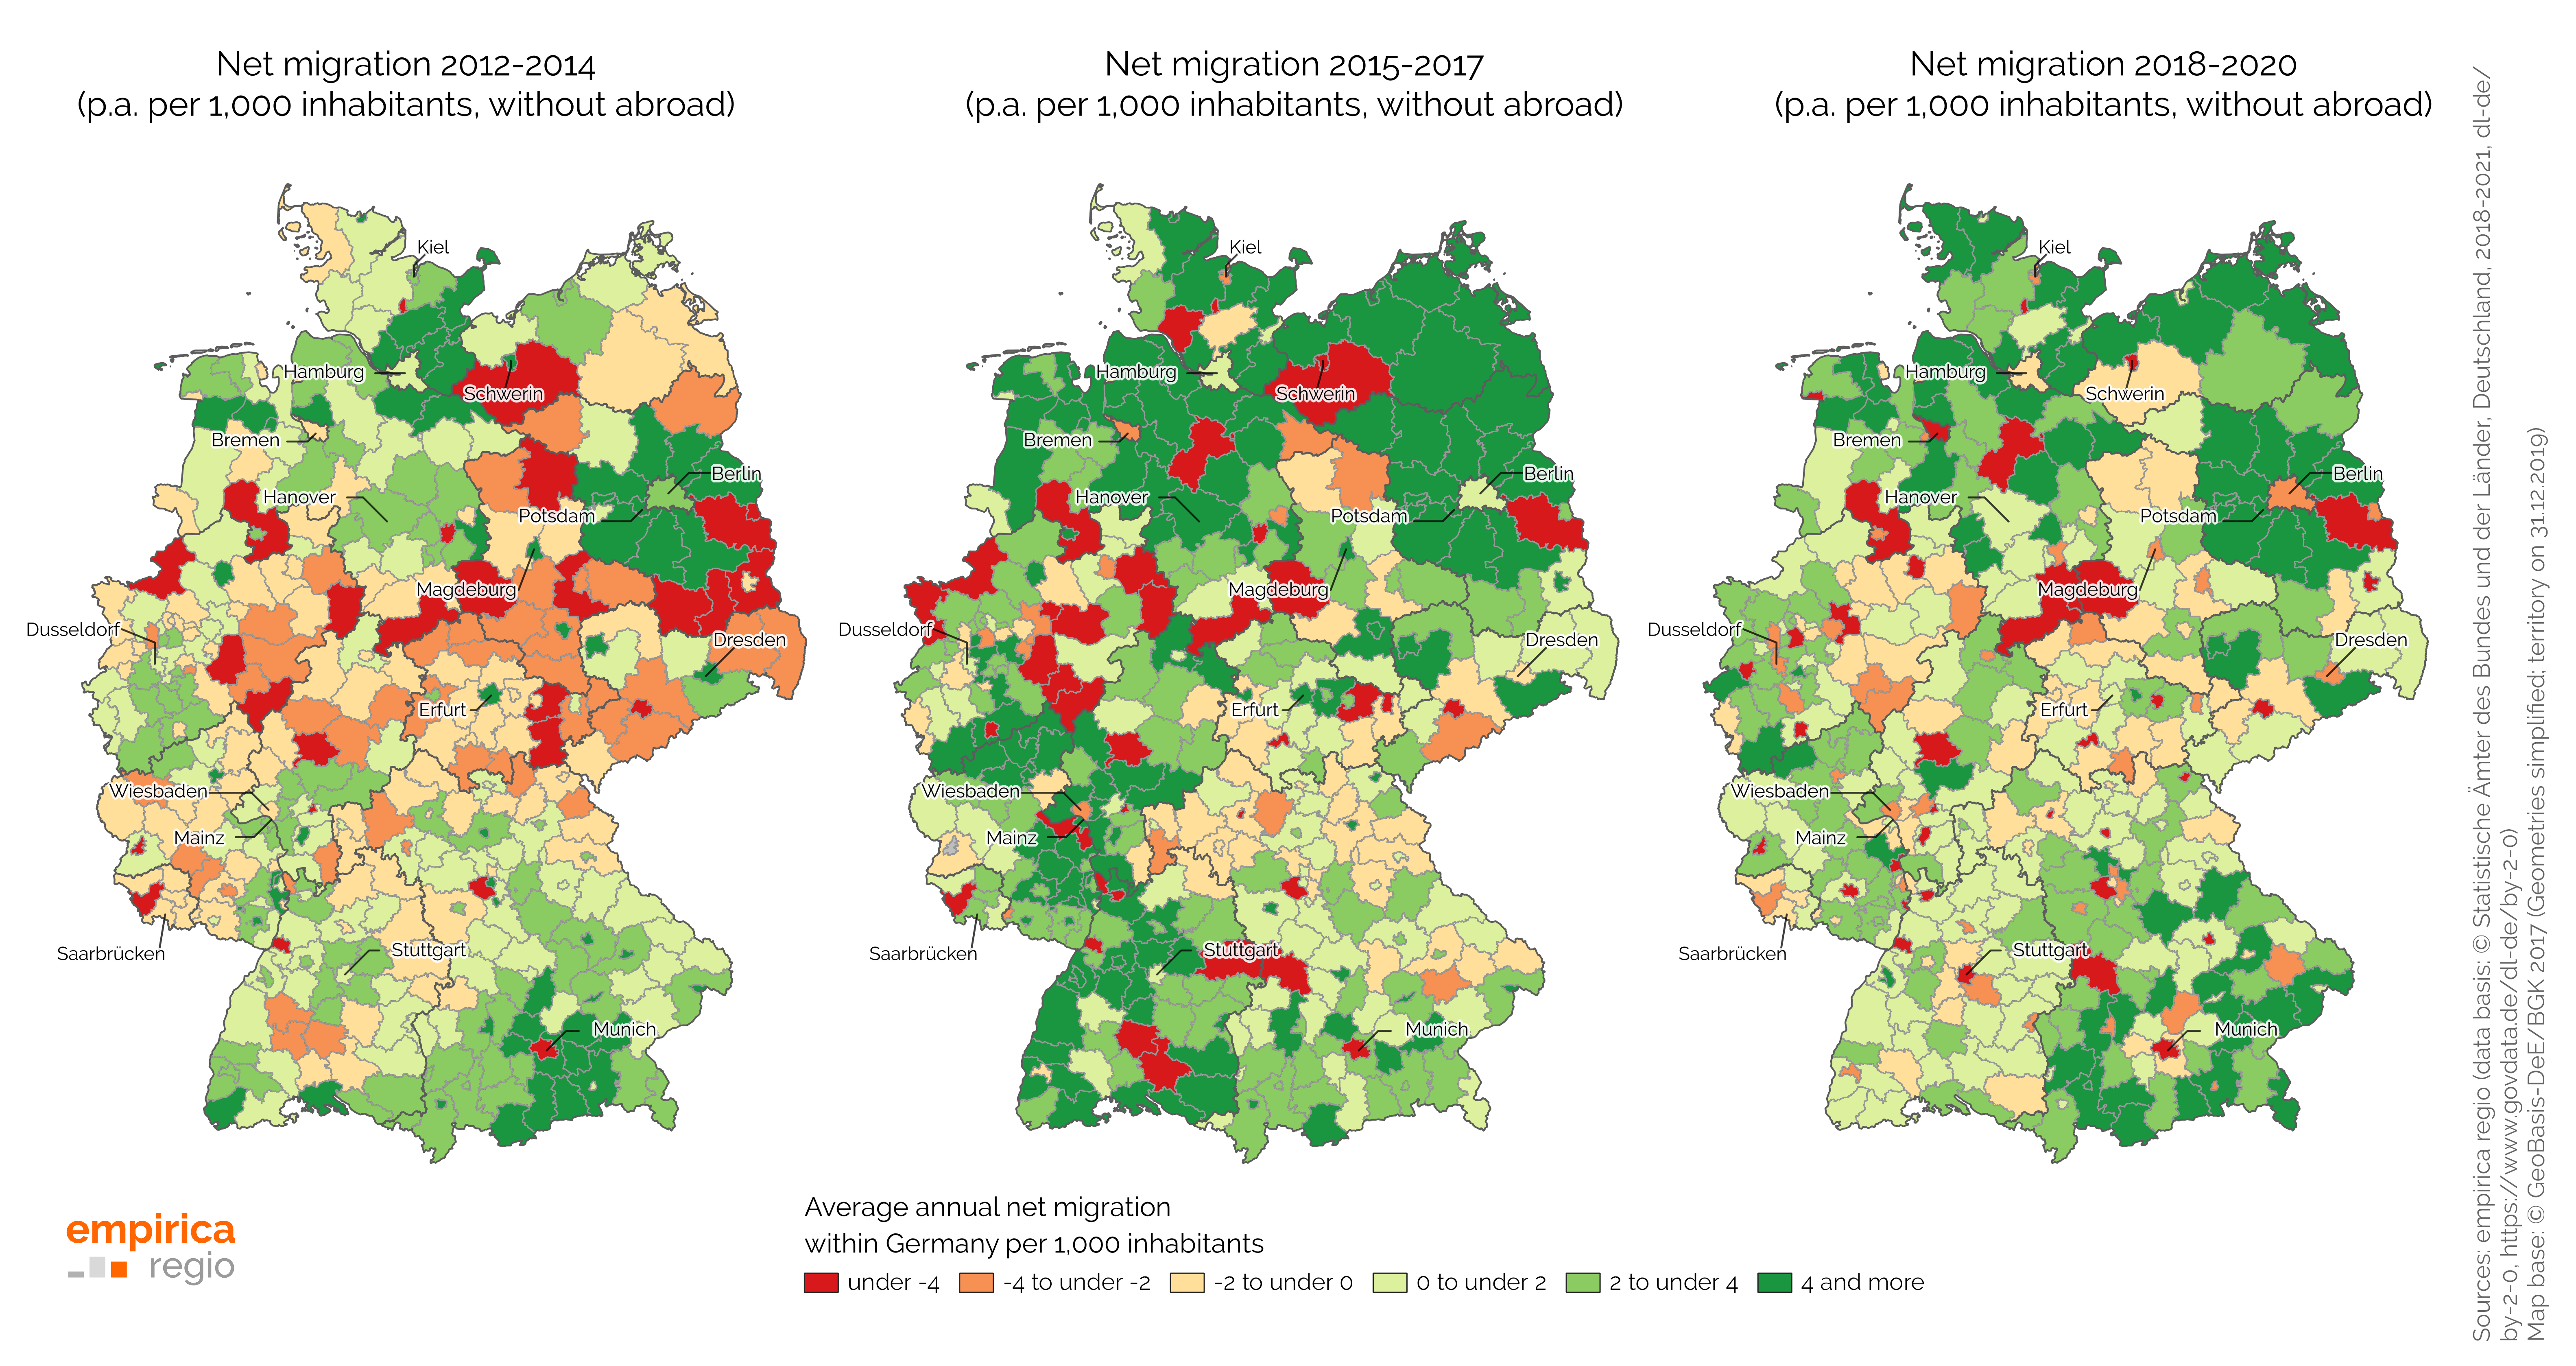 Average, annual net migration from 2012 to 2020 within Germany per 1,000 inhabitants at district level